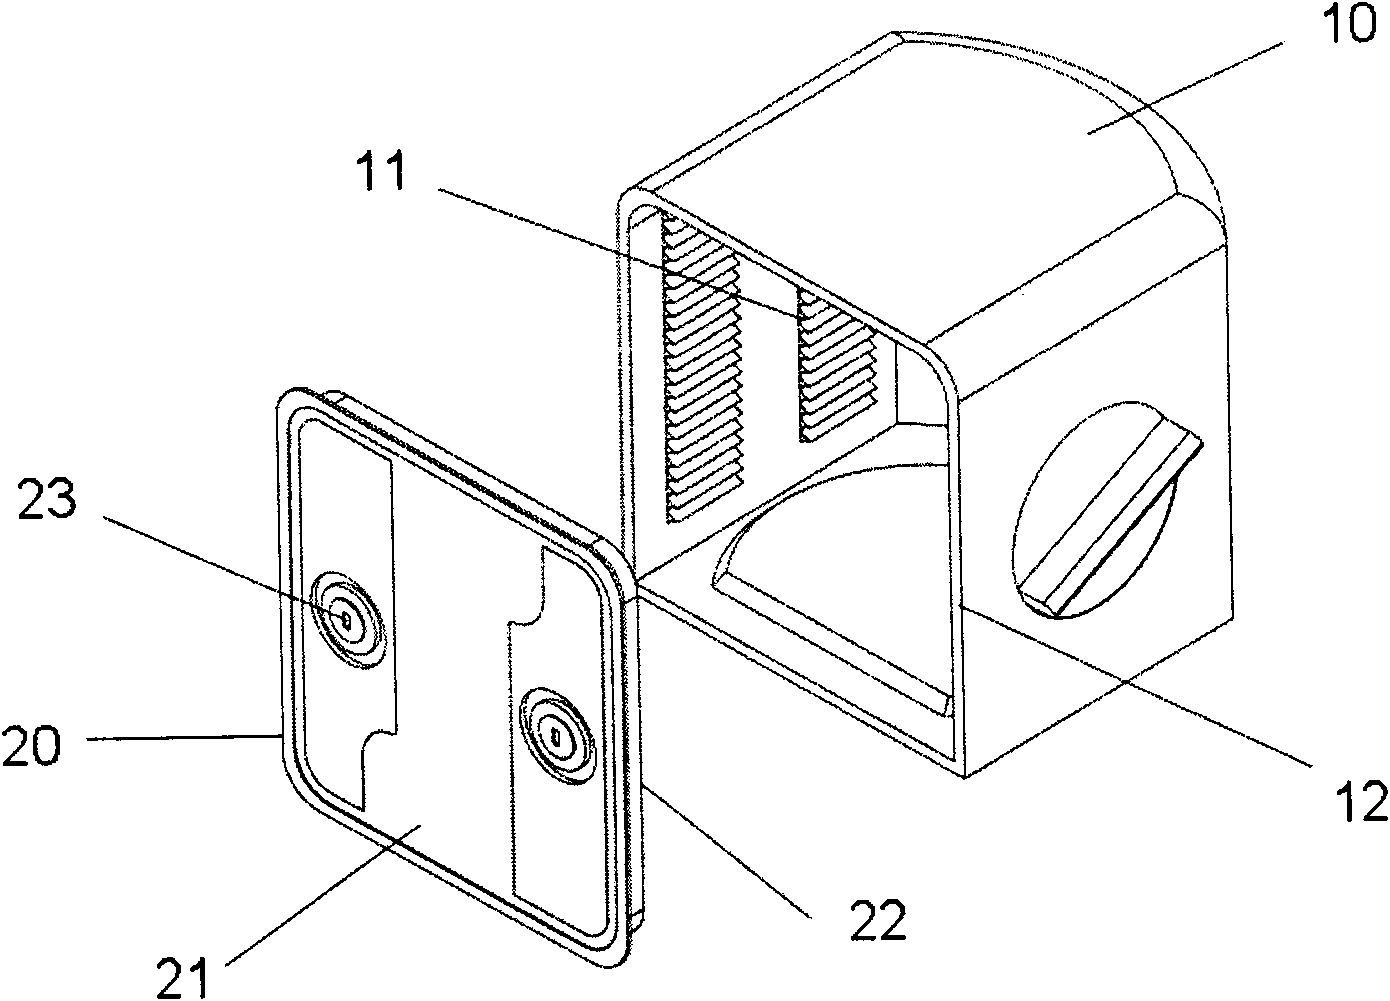 Front opening type wafer box with elliptic latch structure